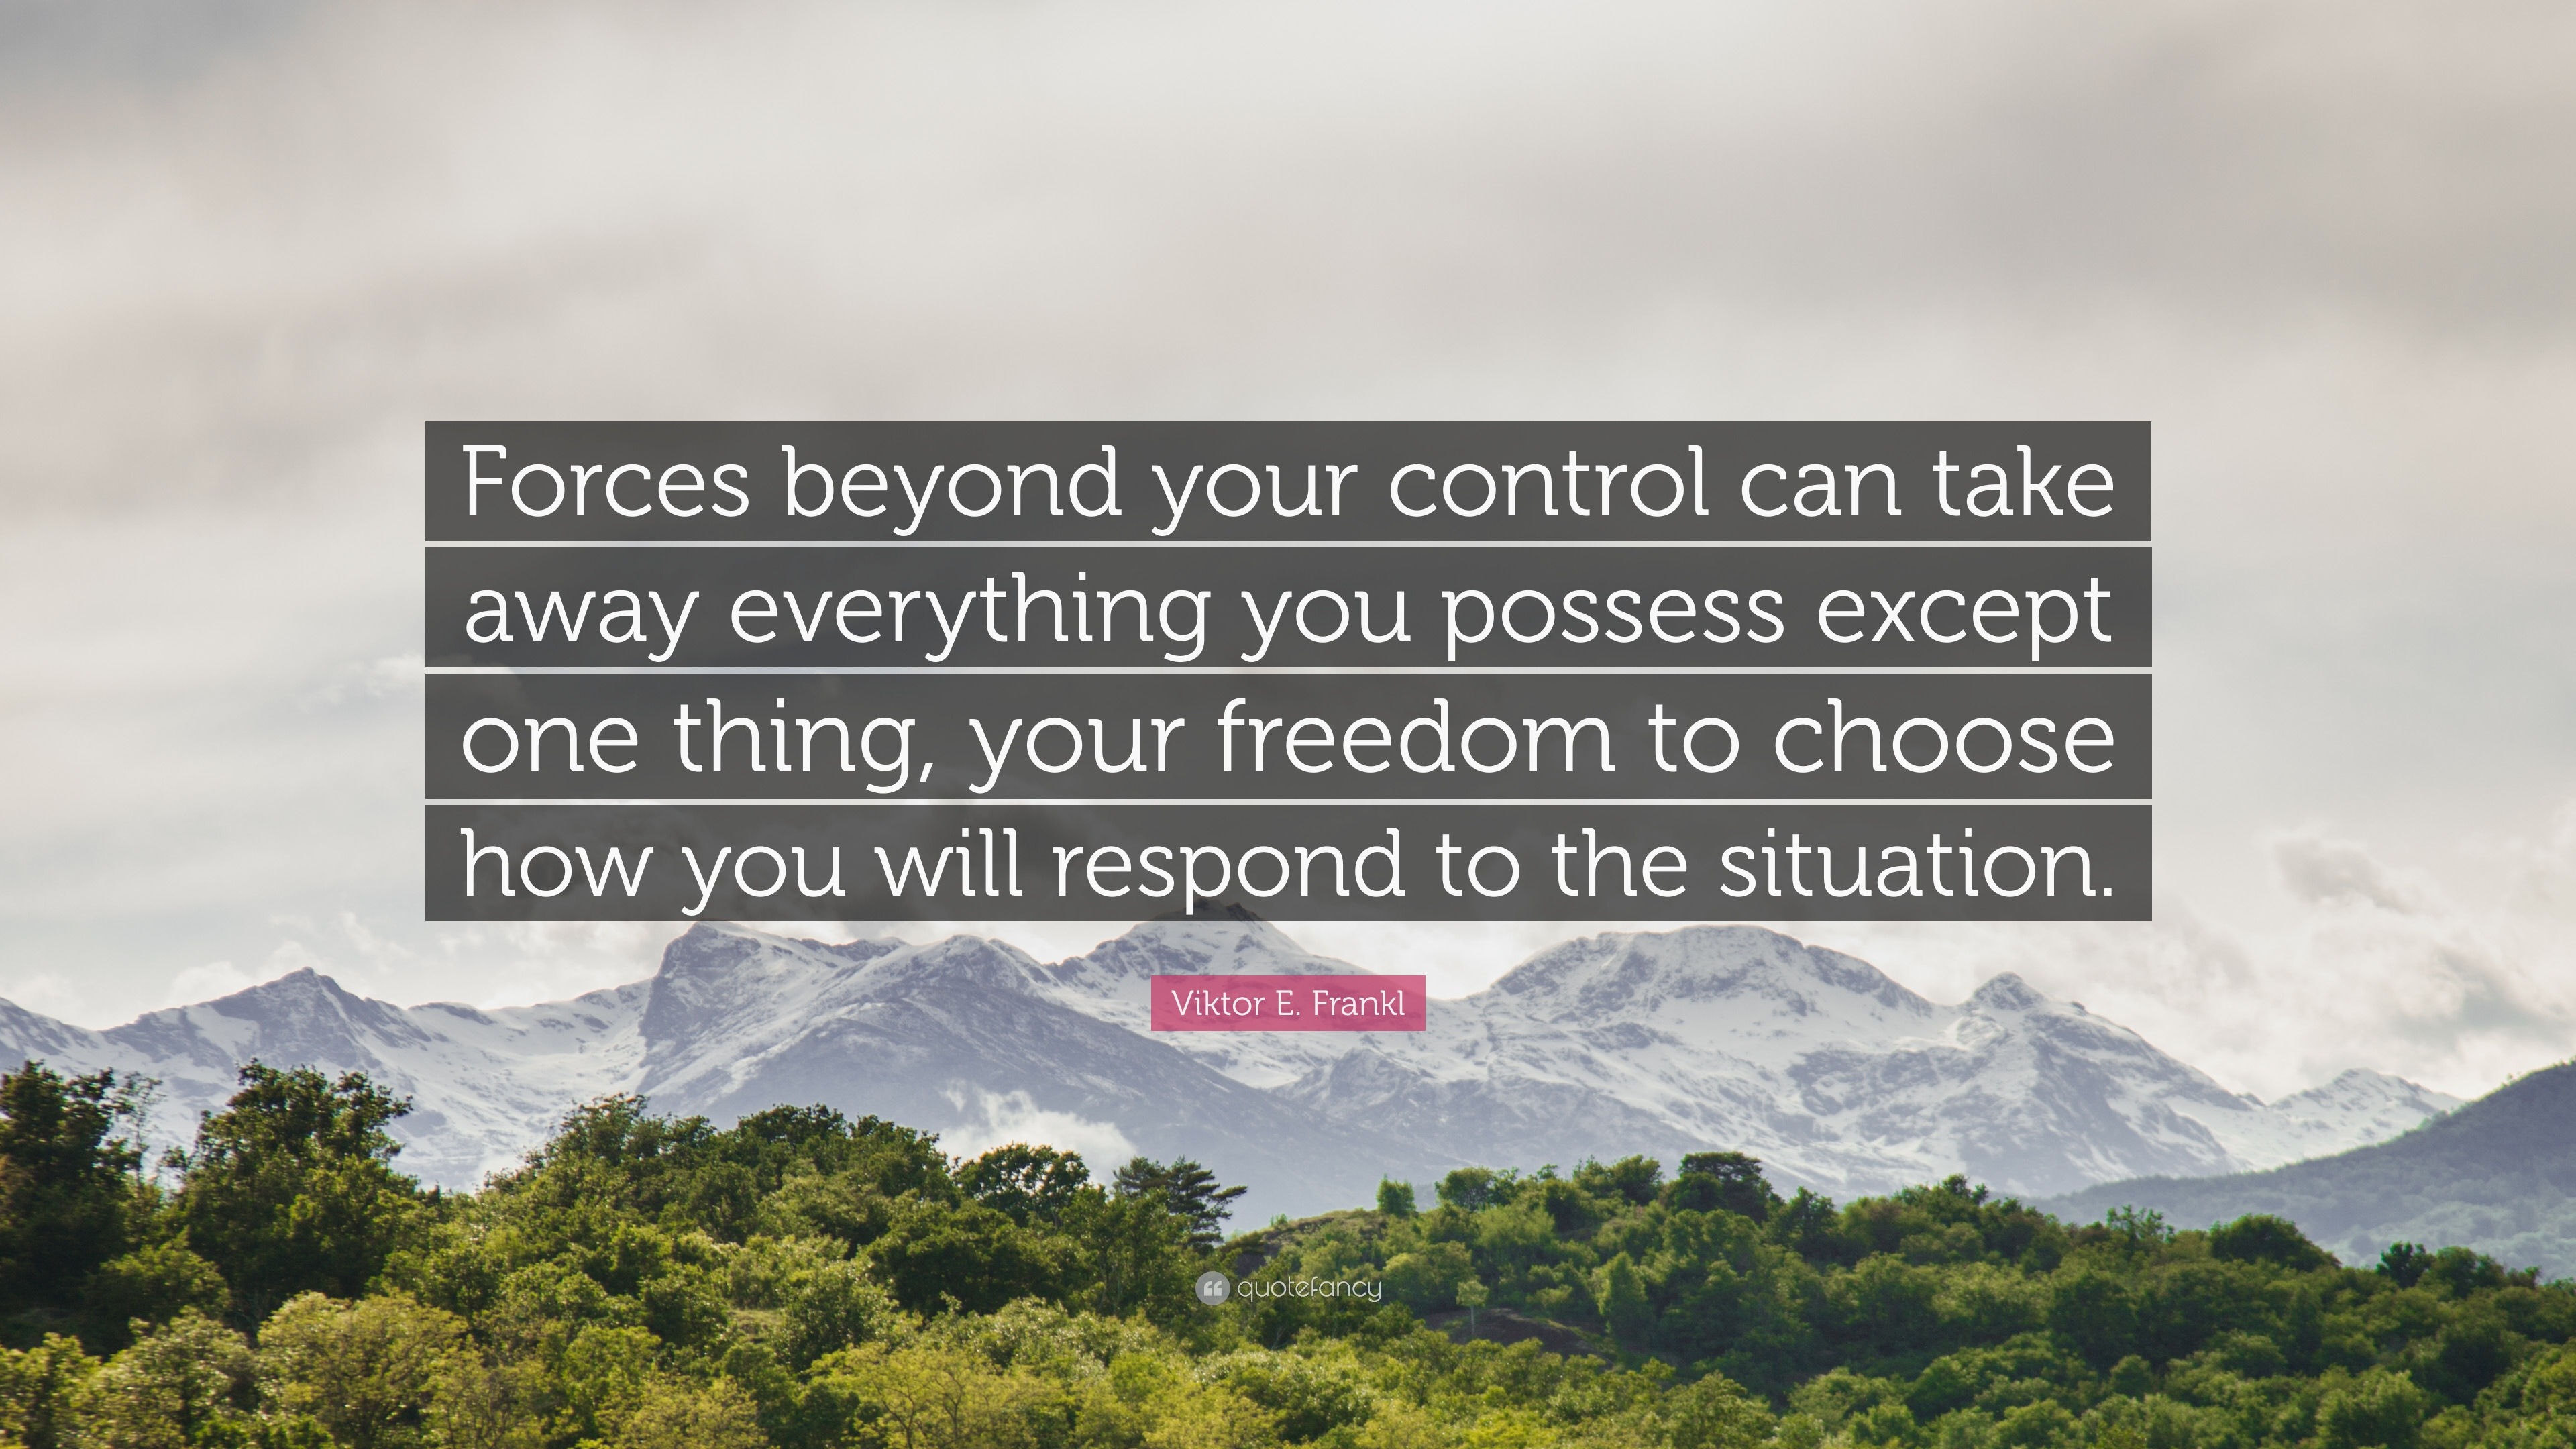 Viktor E. Frankl Quote: “Forces beyond your control can take away